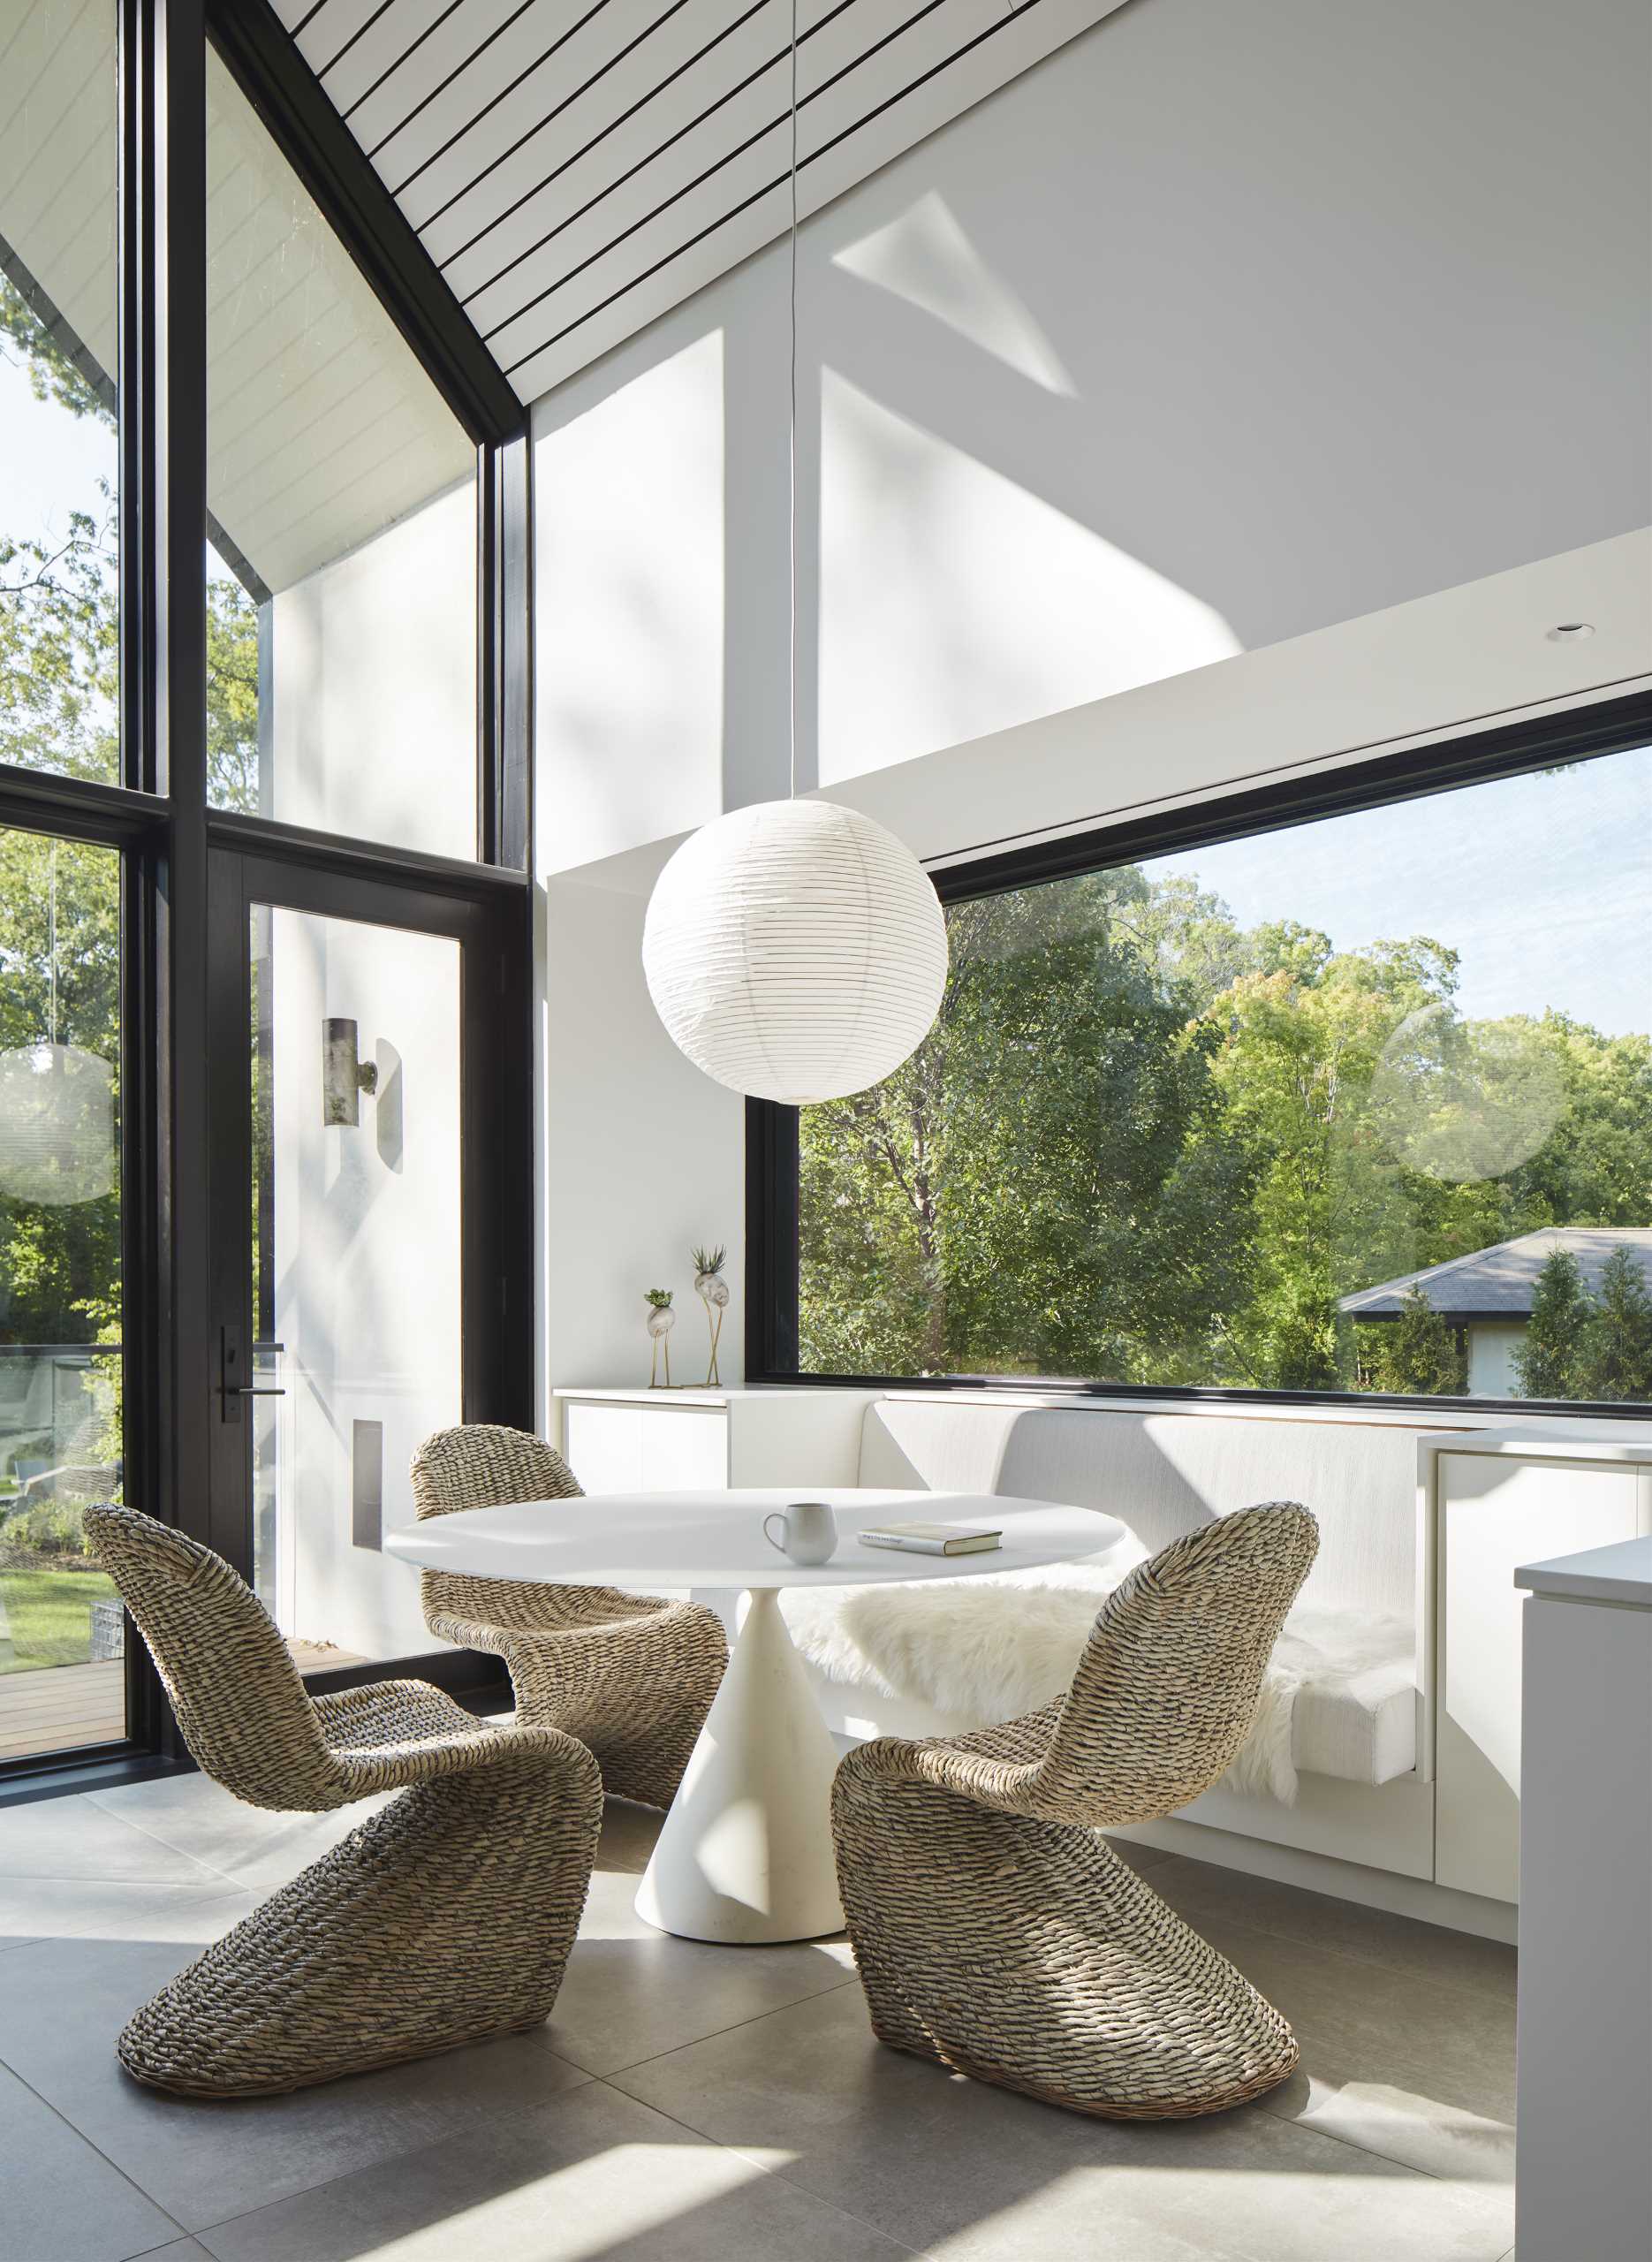 A breakfast dining area with a built-in banquette and a round table.